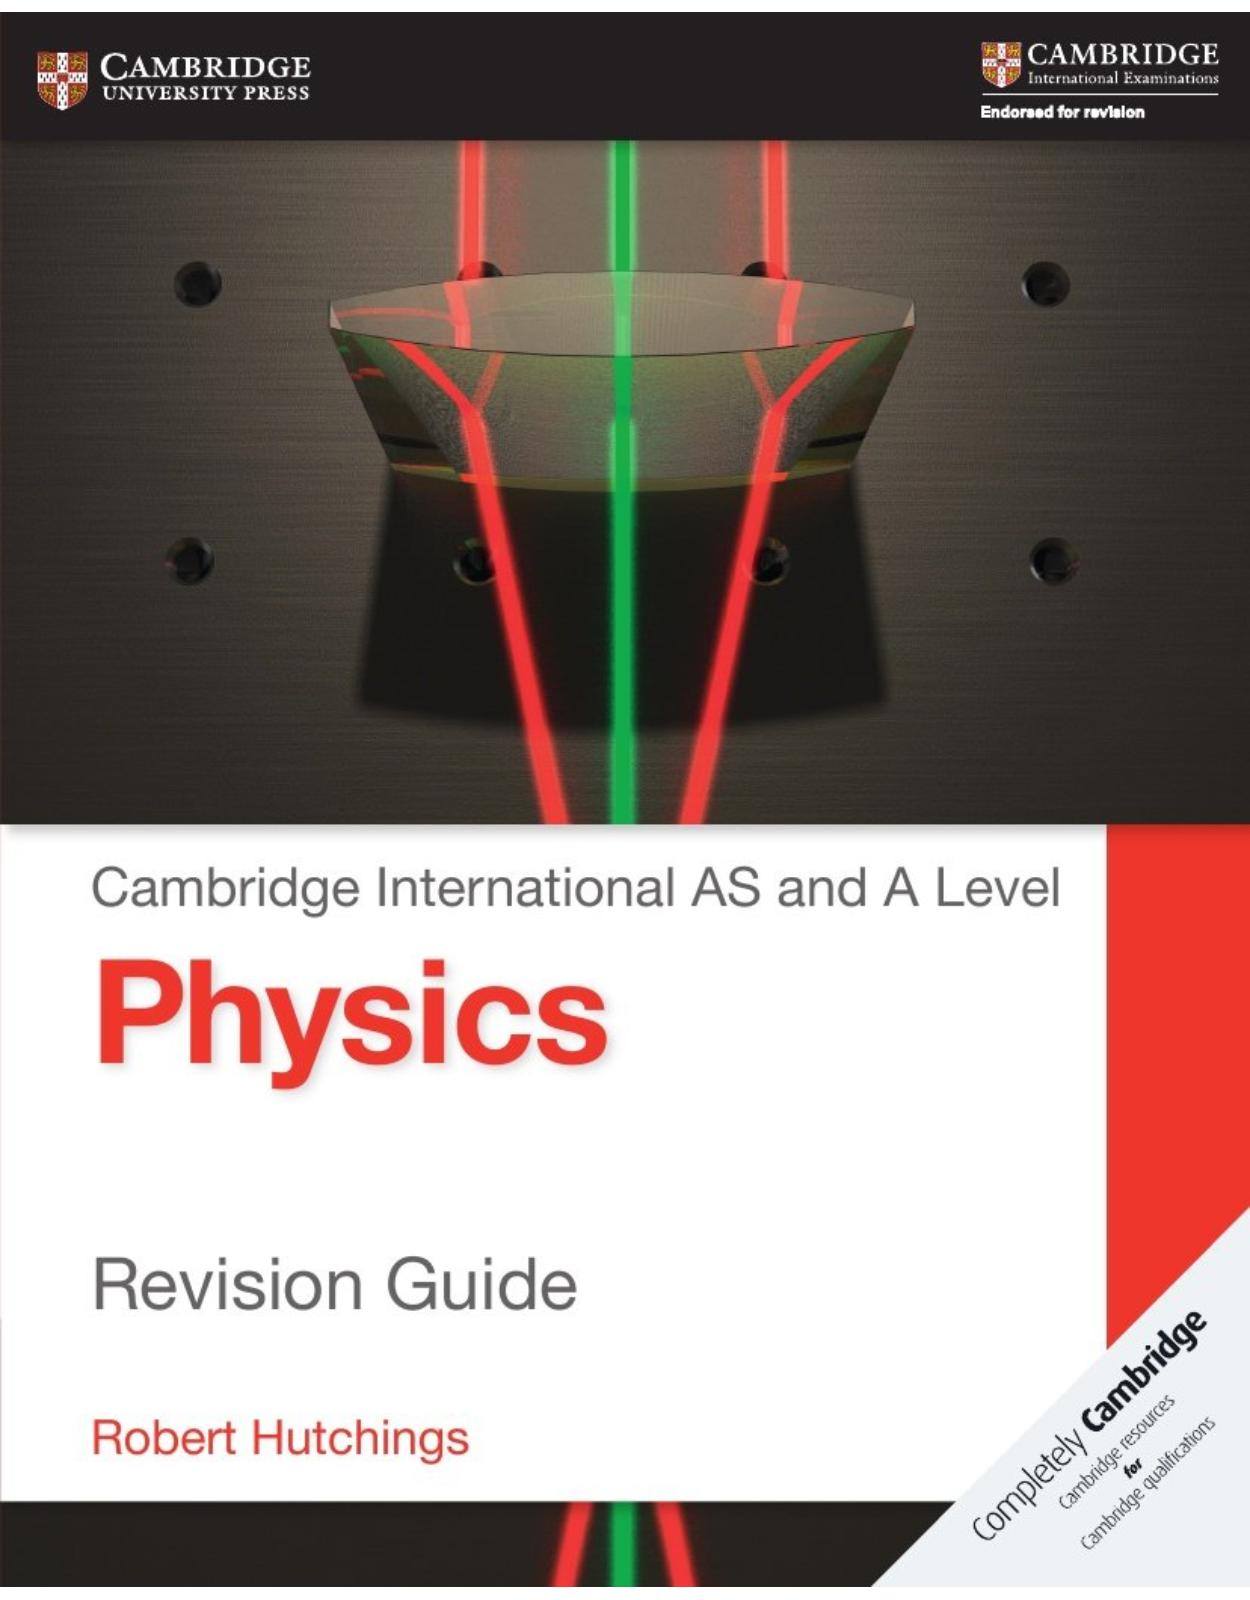 Cambridge International AS and A Level Physics Revision Guide (Cambridge International Examinations)